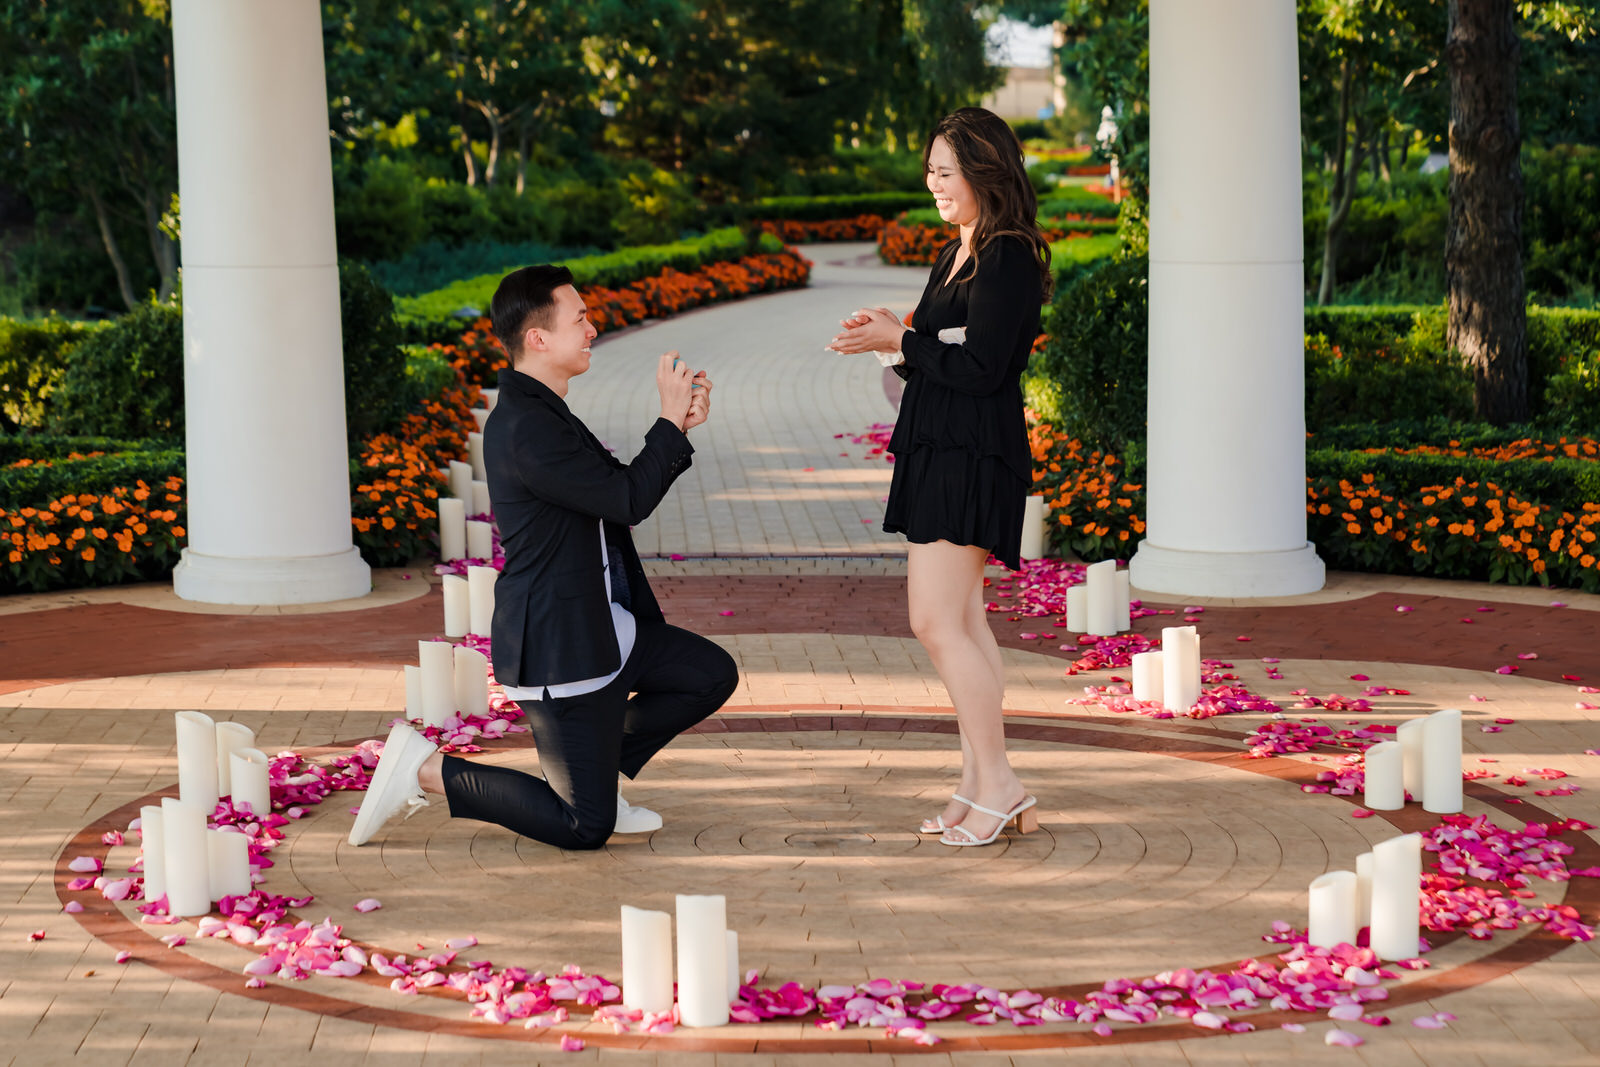 Boston proposal with rose petals by Boston proposal photographer Nicole Chan Photography